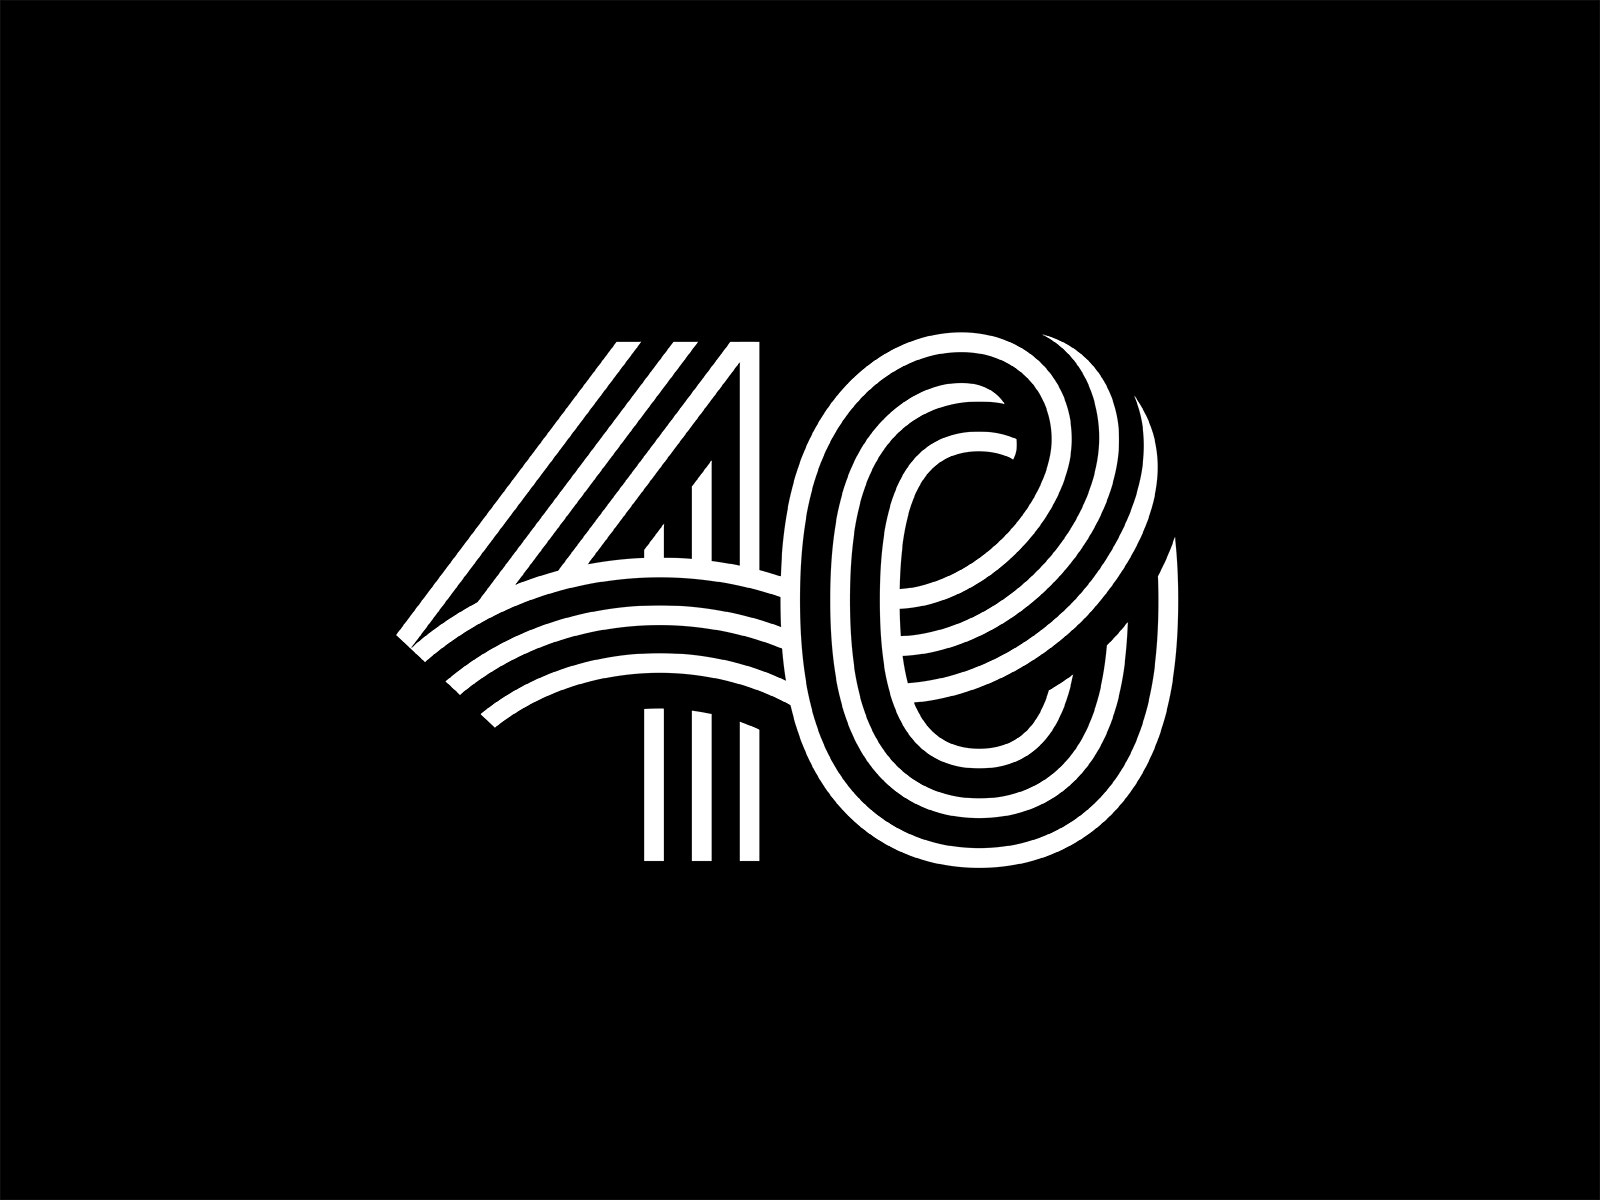 40 years logo for construction material company | Logo design contest |  99designs